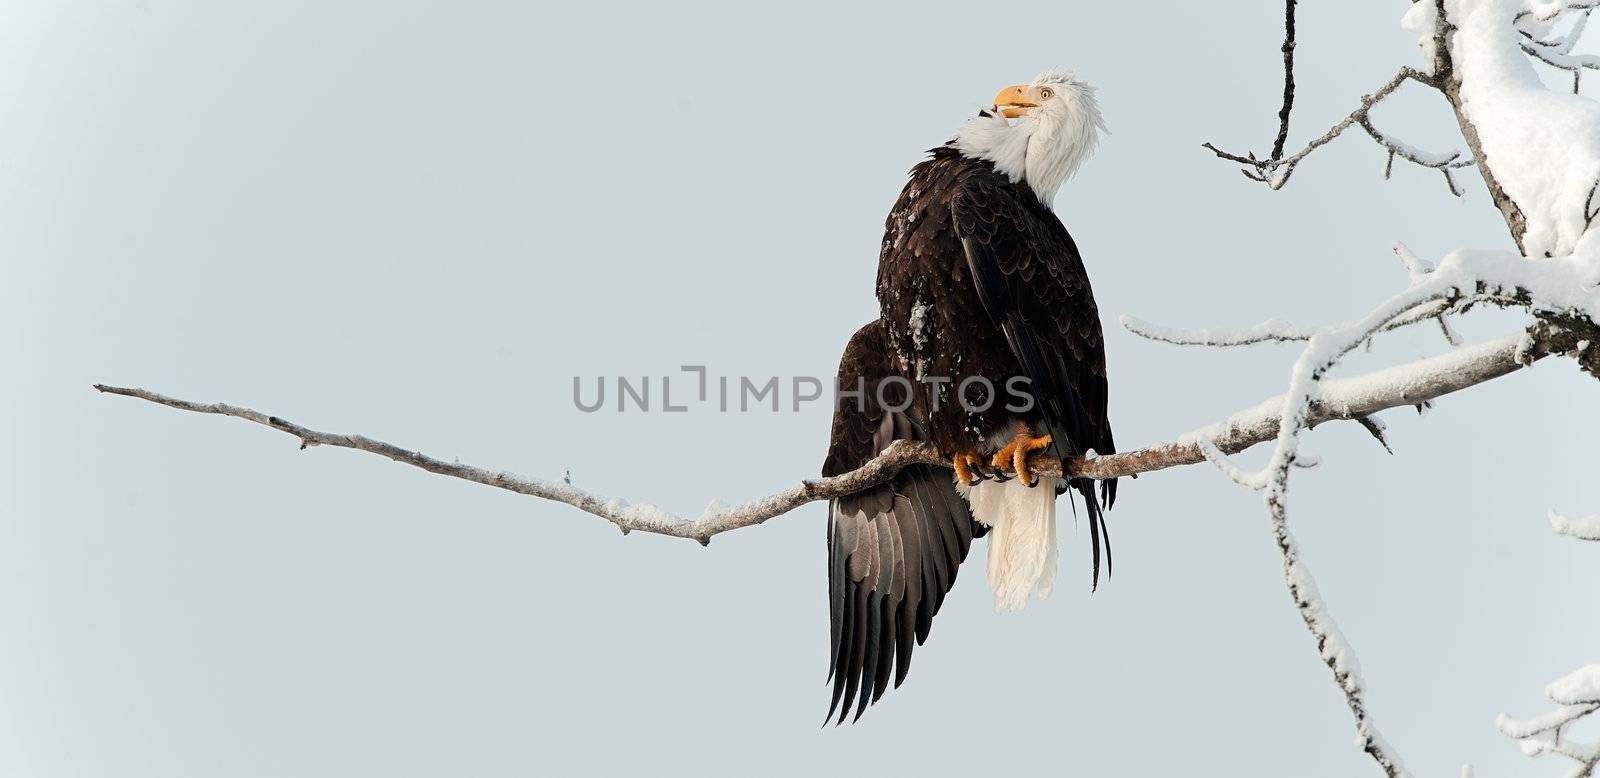 Bald eagle perched on branch by SURZ